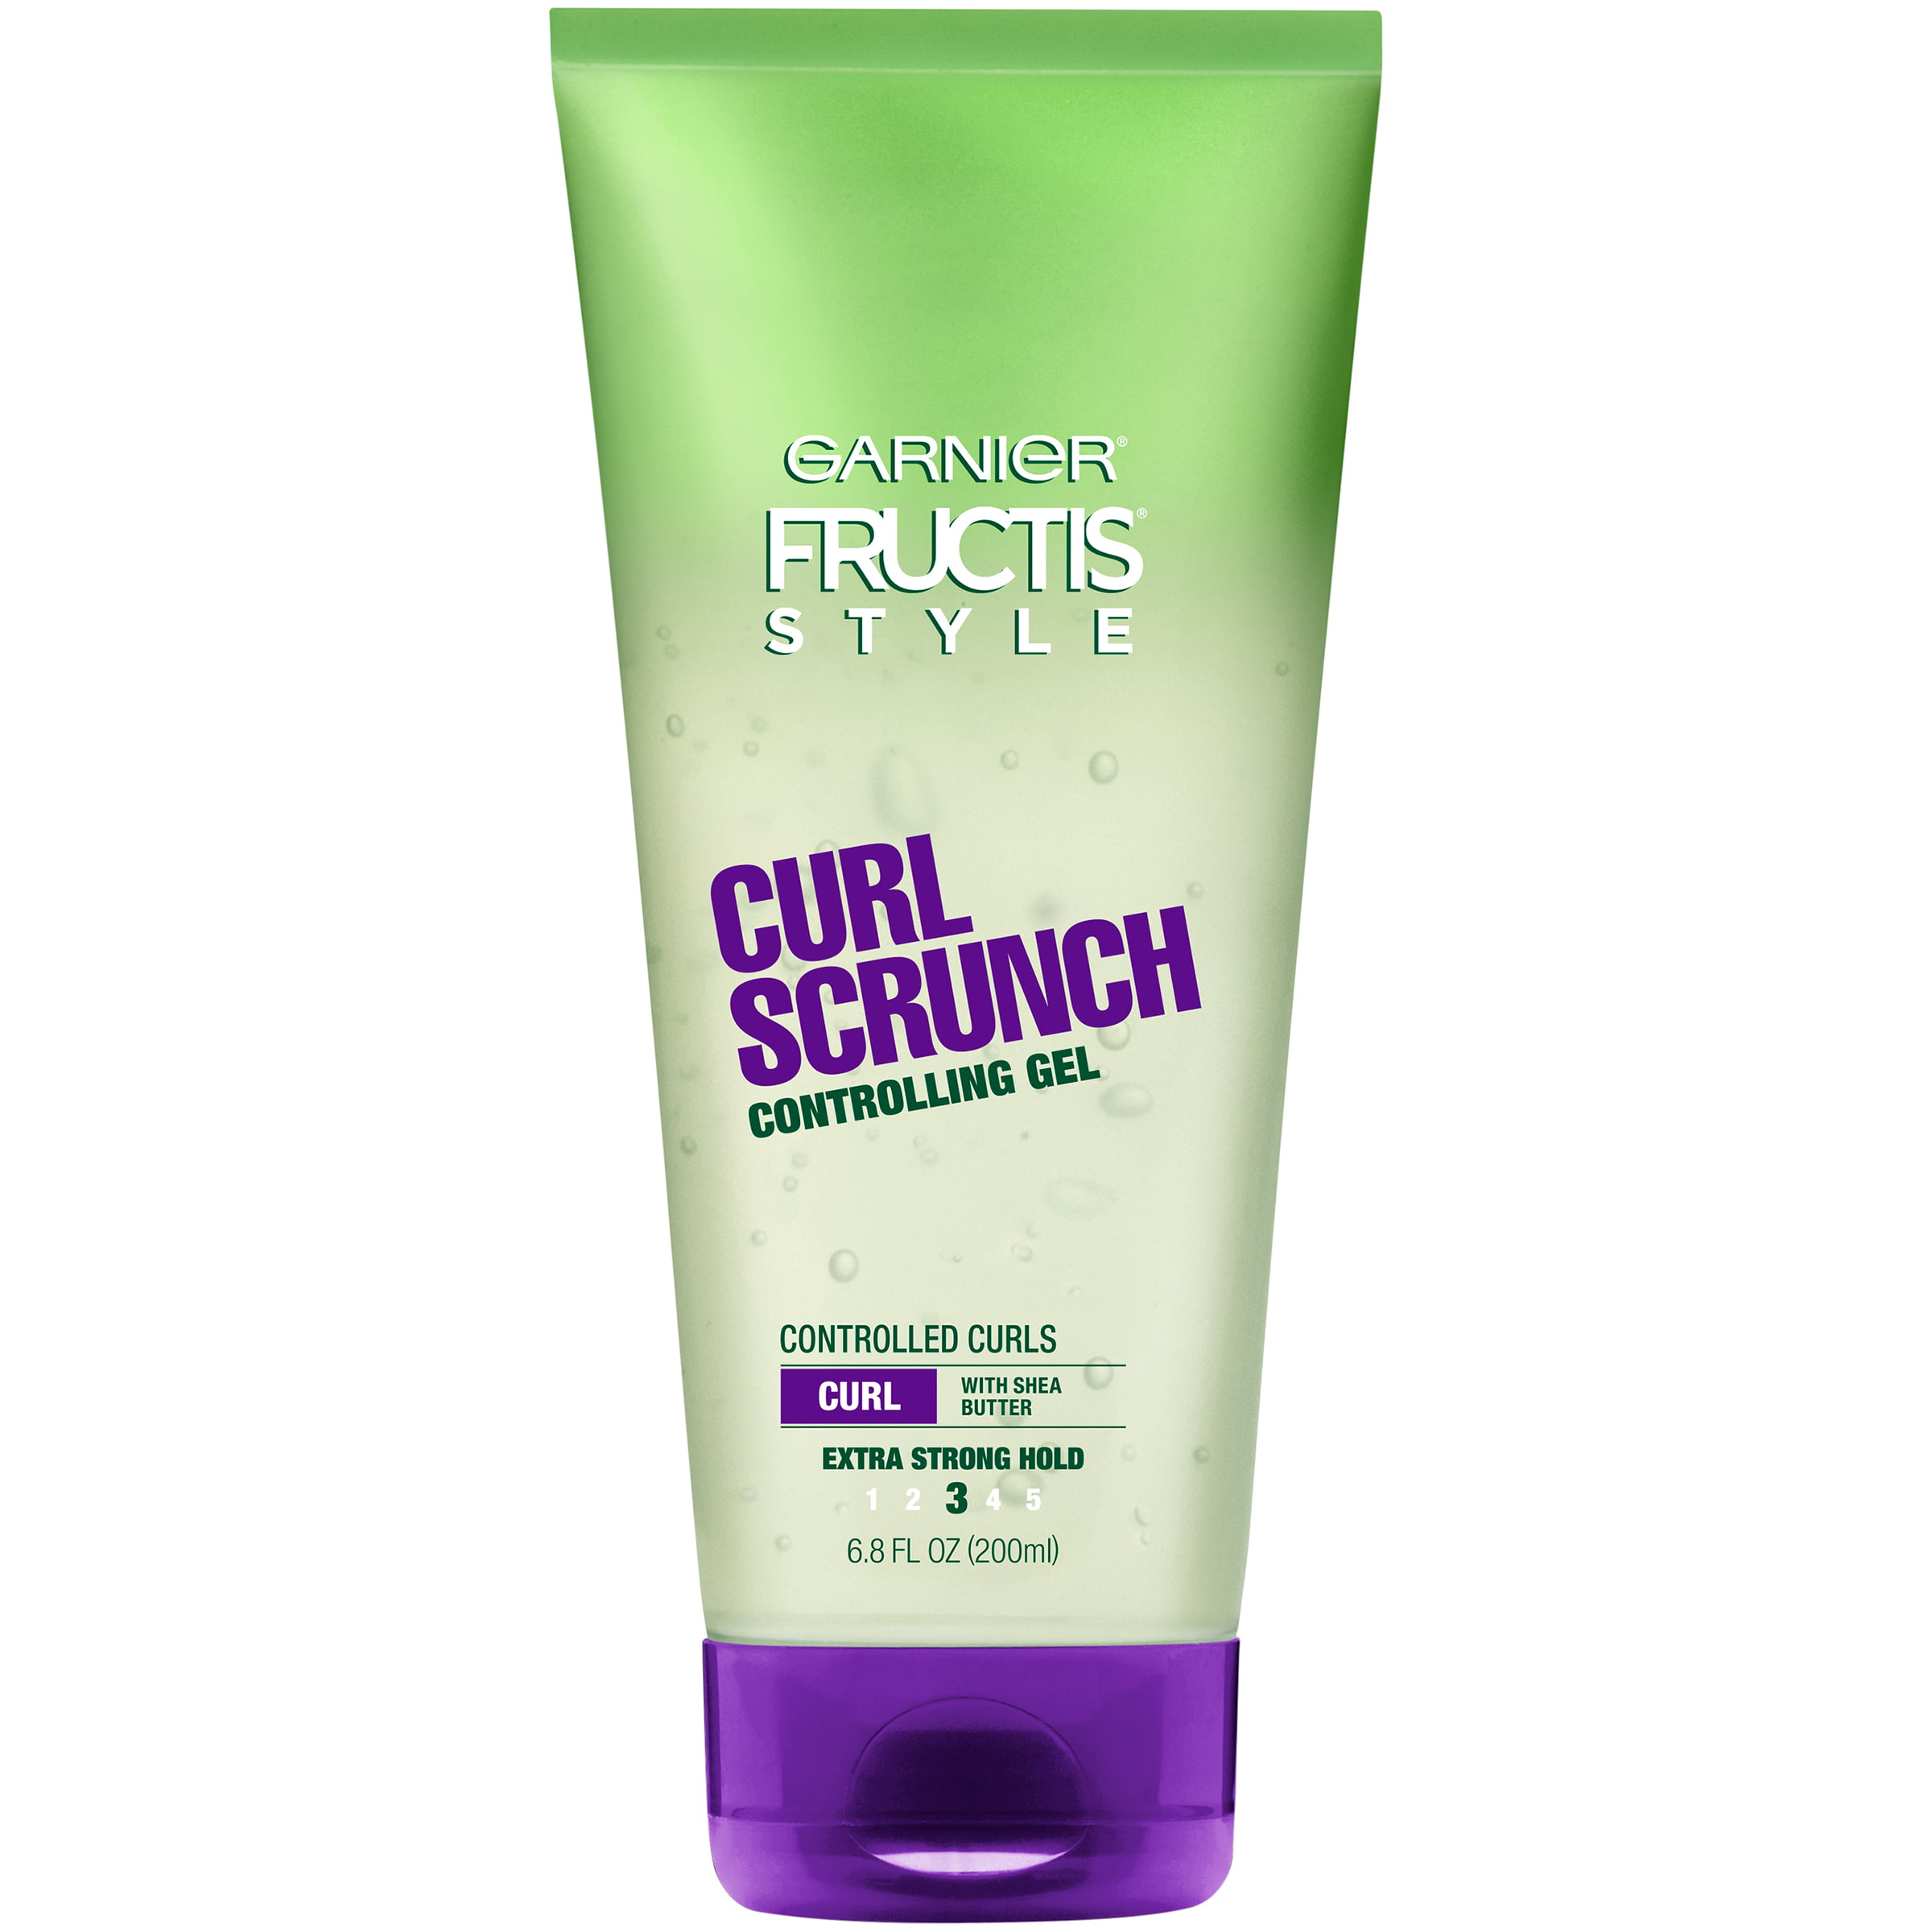 Fructis Style Curl Scrunch Controlling Gel, For Curly Hair, 6.8 fl oz